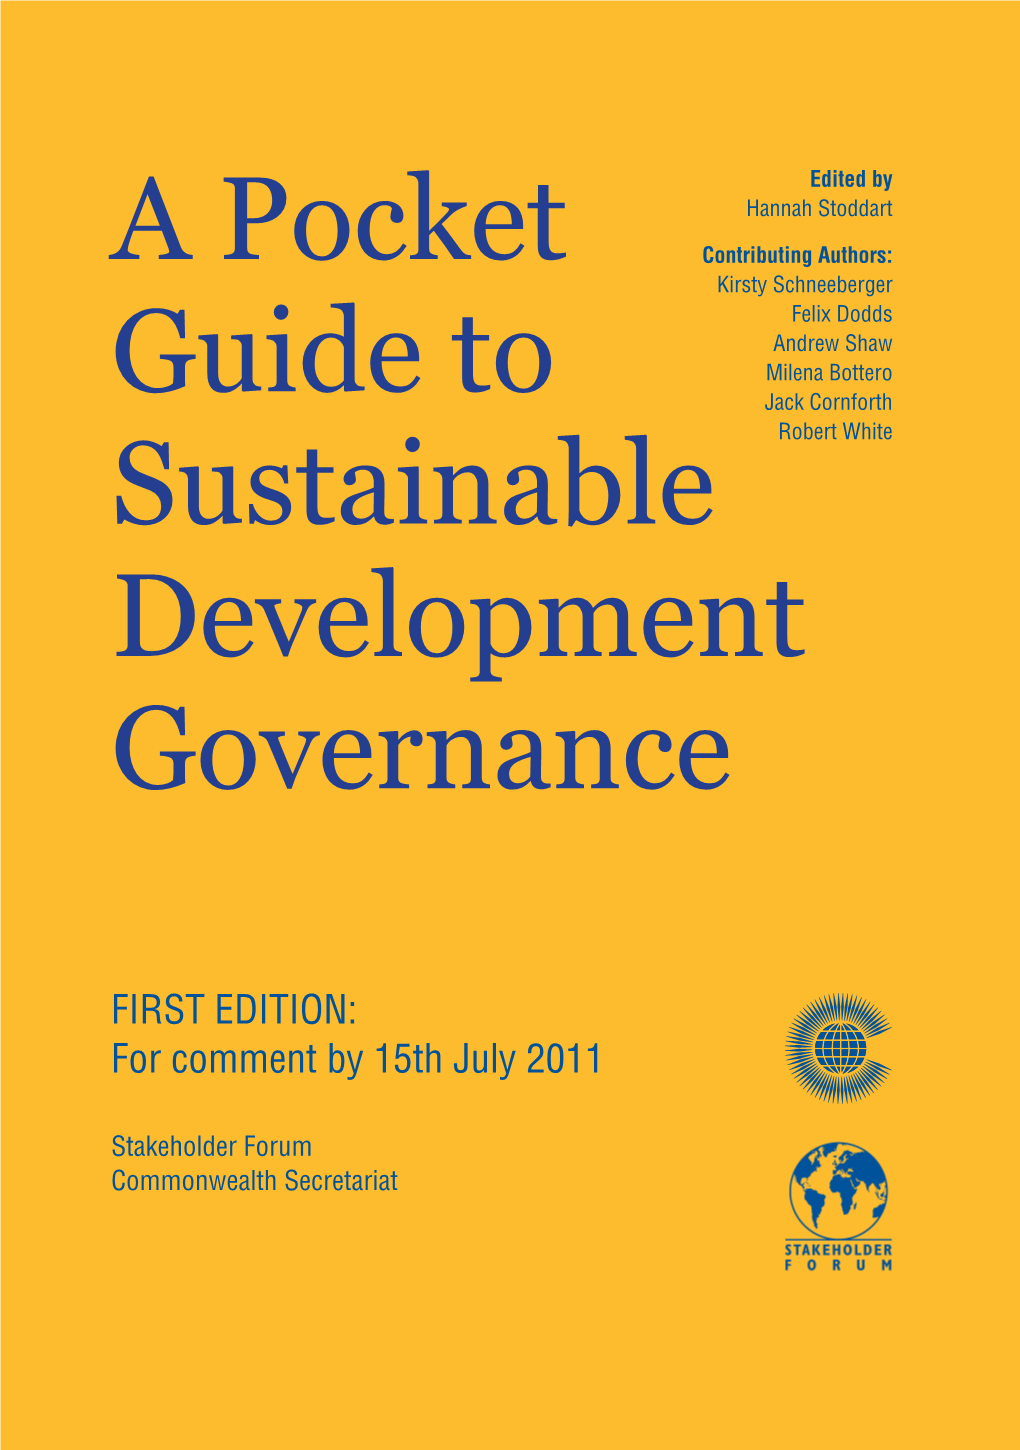 A Pocket Guide to Sustainable Development Governance